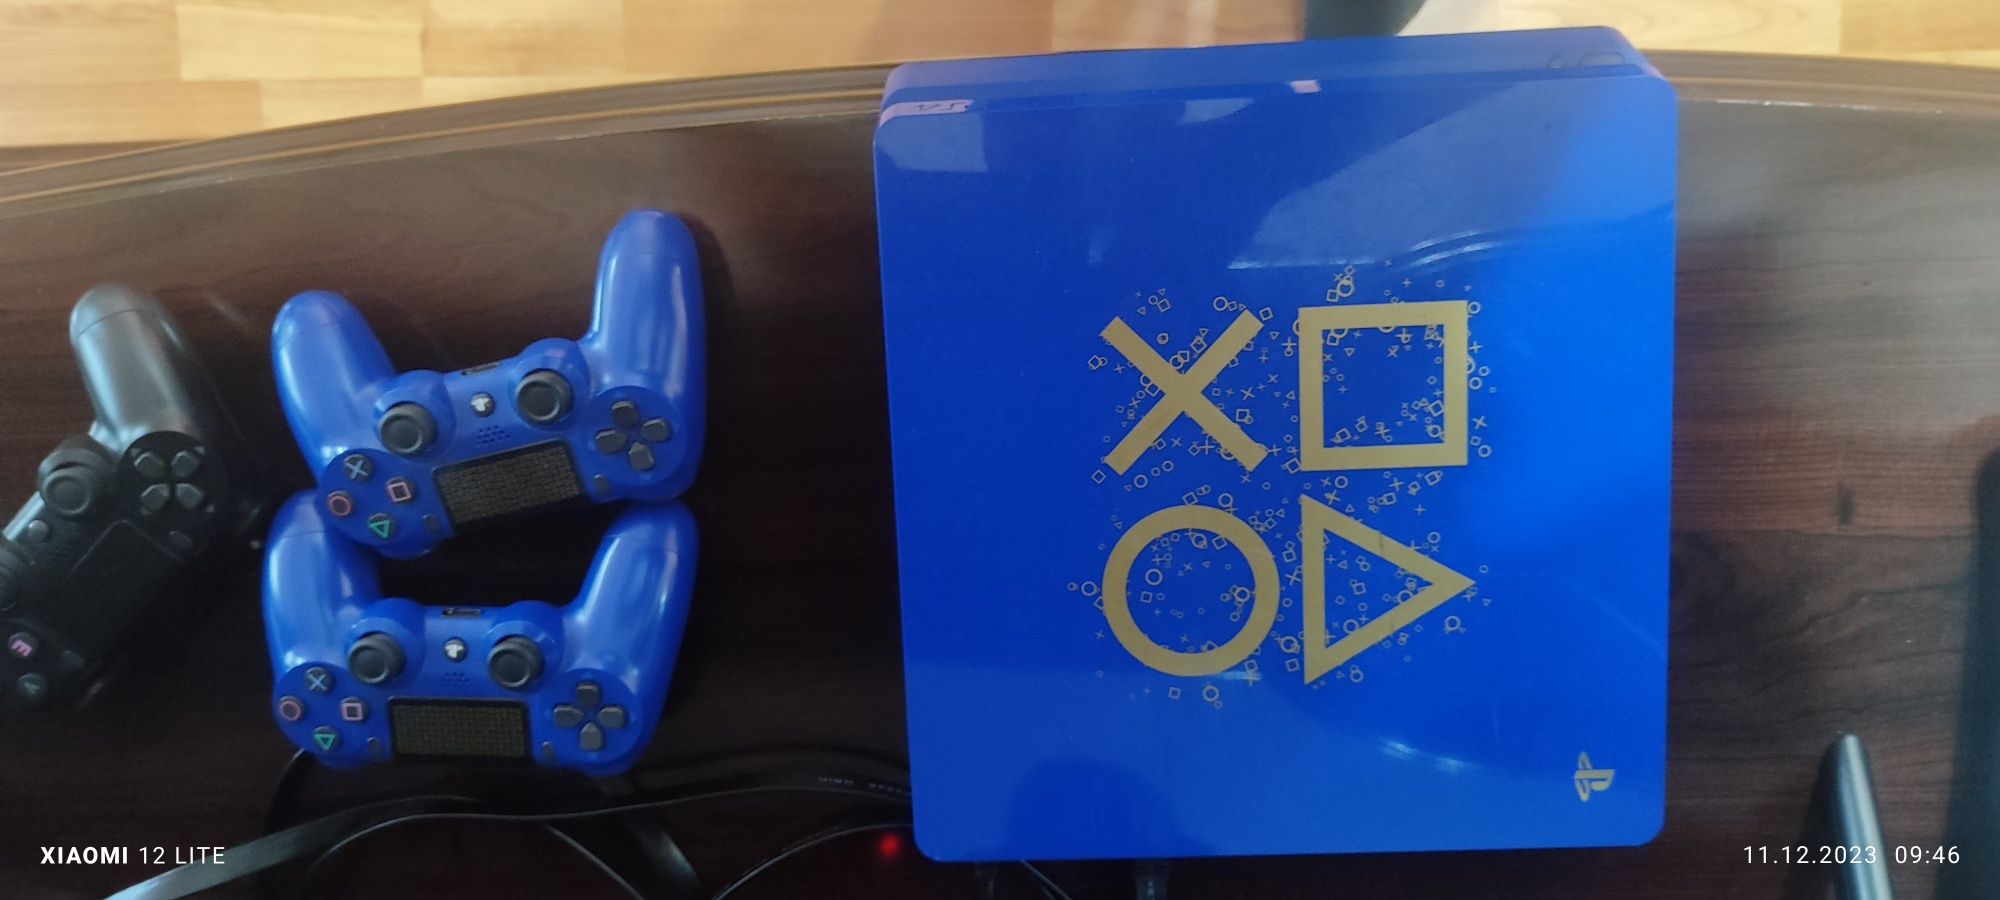 Play Station 4 gold edition